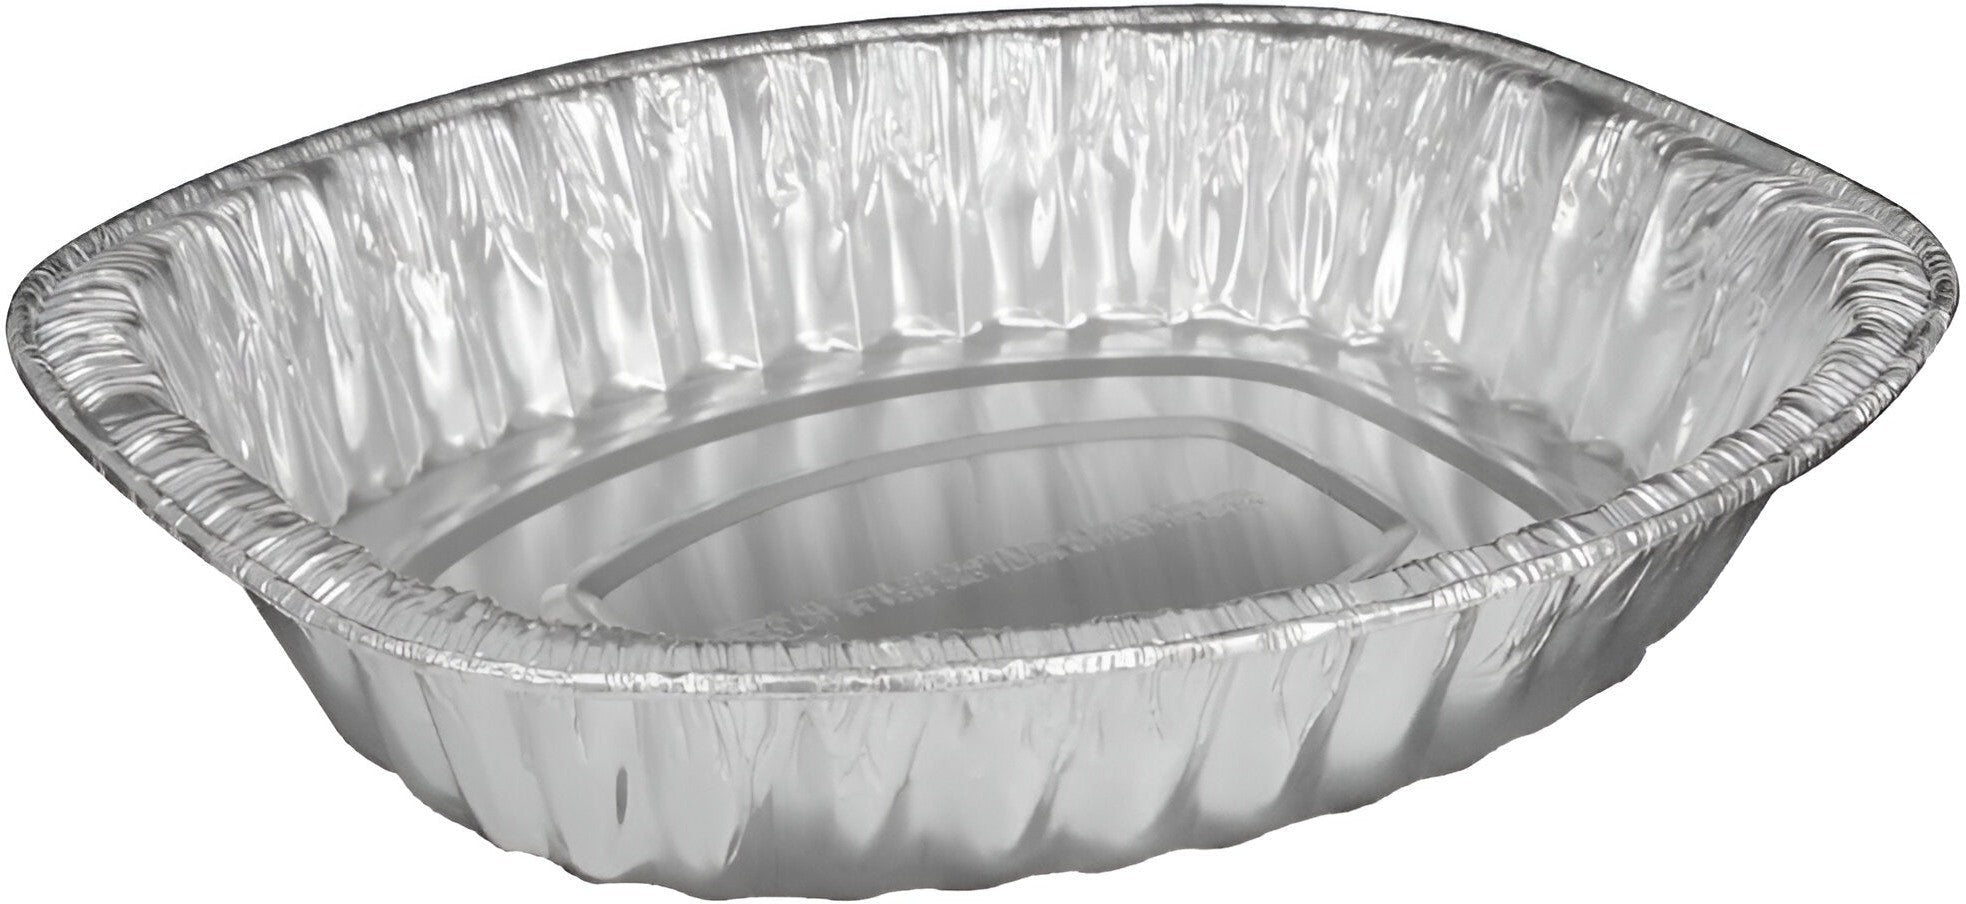 HFA - 13.88" x 11" Giant Oval Roaster Foil Containers, 100/Cs - 323-00-100